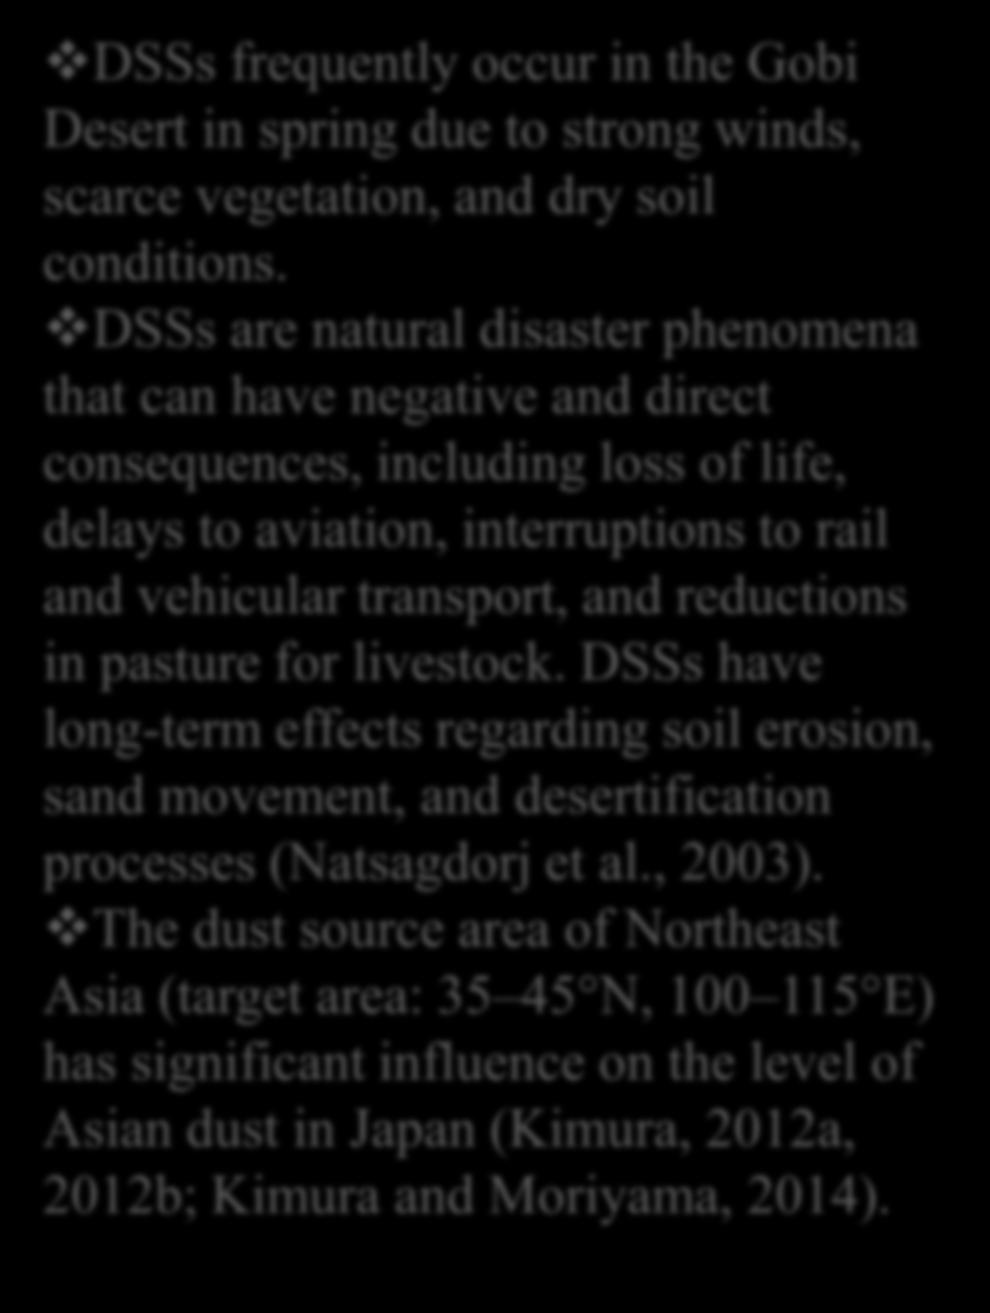 DSSs frequently occur in the Gobi Desert in spring due to strong winds, scarce vegetation, and dry soil conditions.